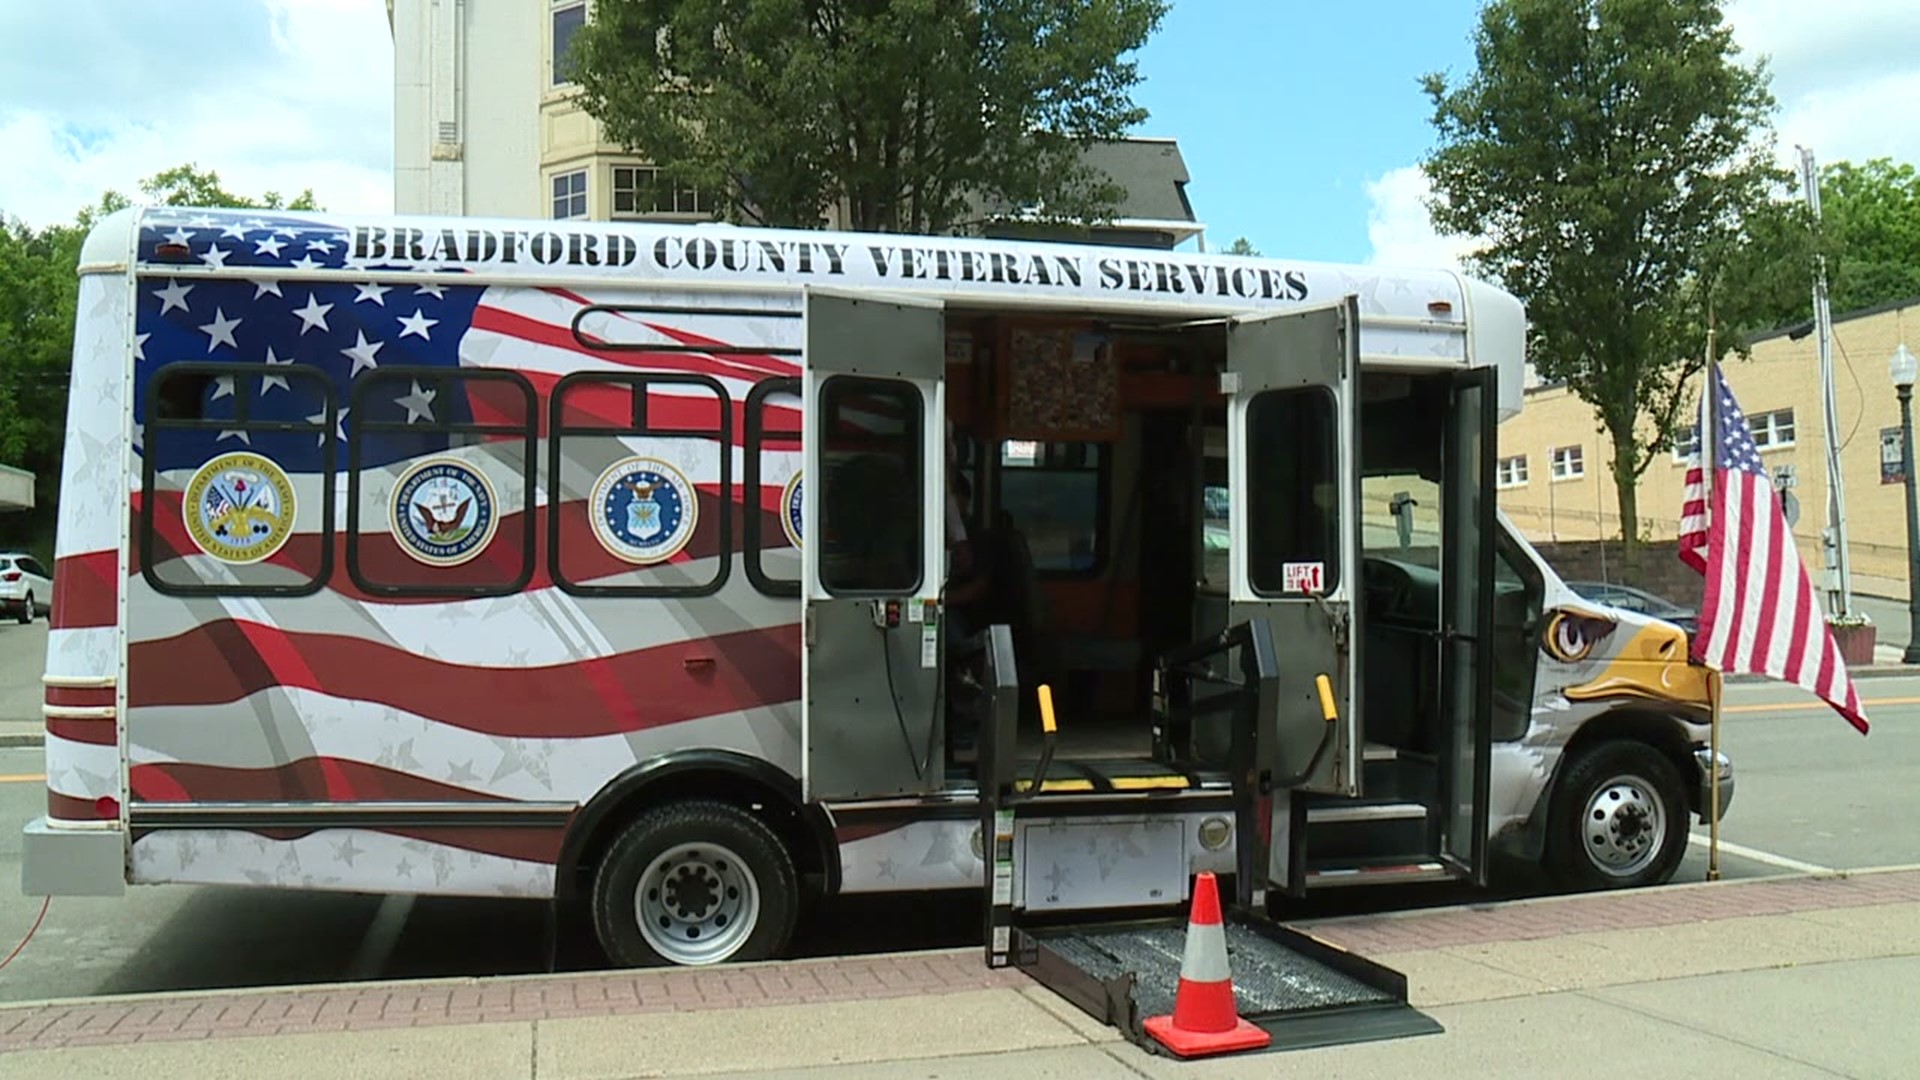 Bradford County has refurbished their old bookmobile into a veteran's resource center.